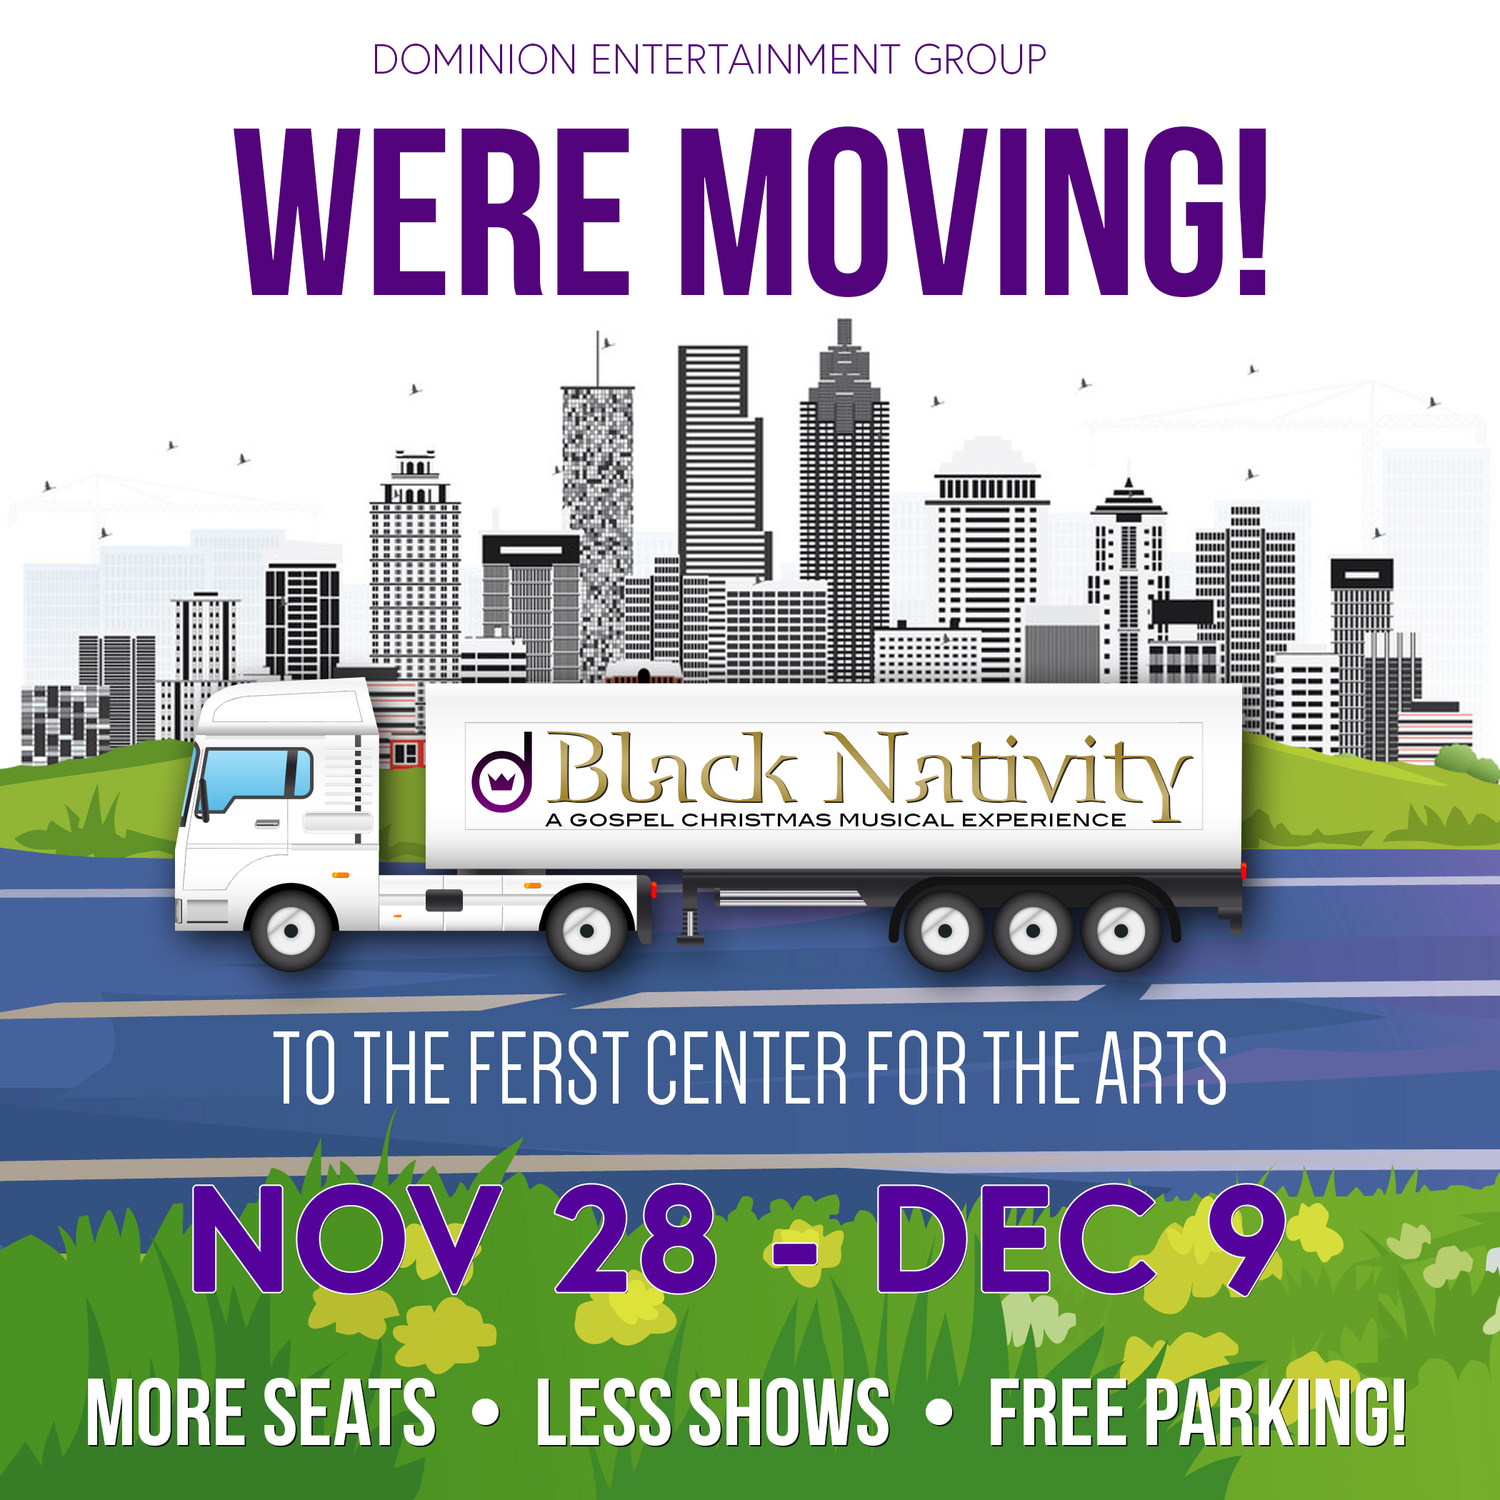 Catch Black Nativity this year in the newly renovated Ferst Center for the Arts! 1